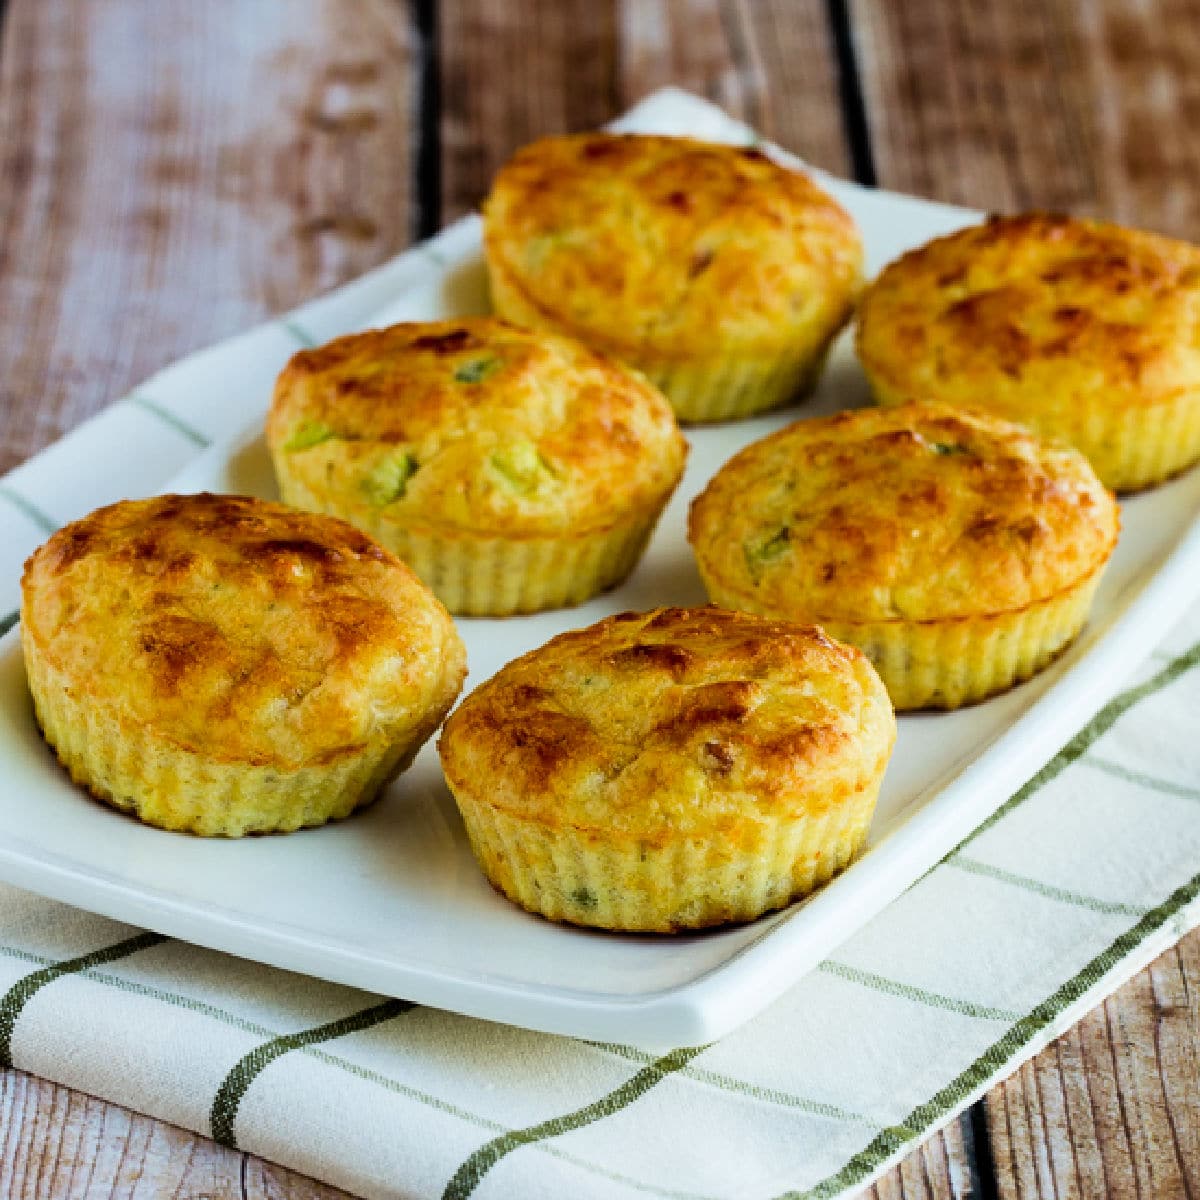 Cottage Cheese Breakfast Muffins with Ham and Cheddar shown on serving platter.